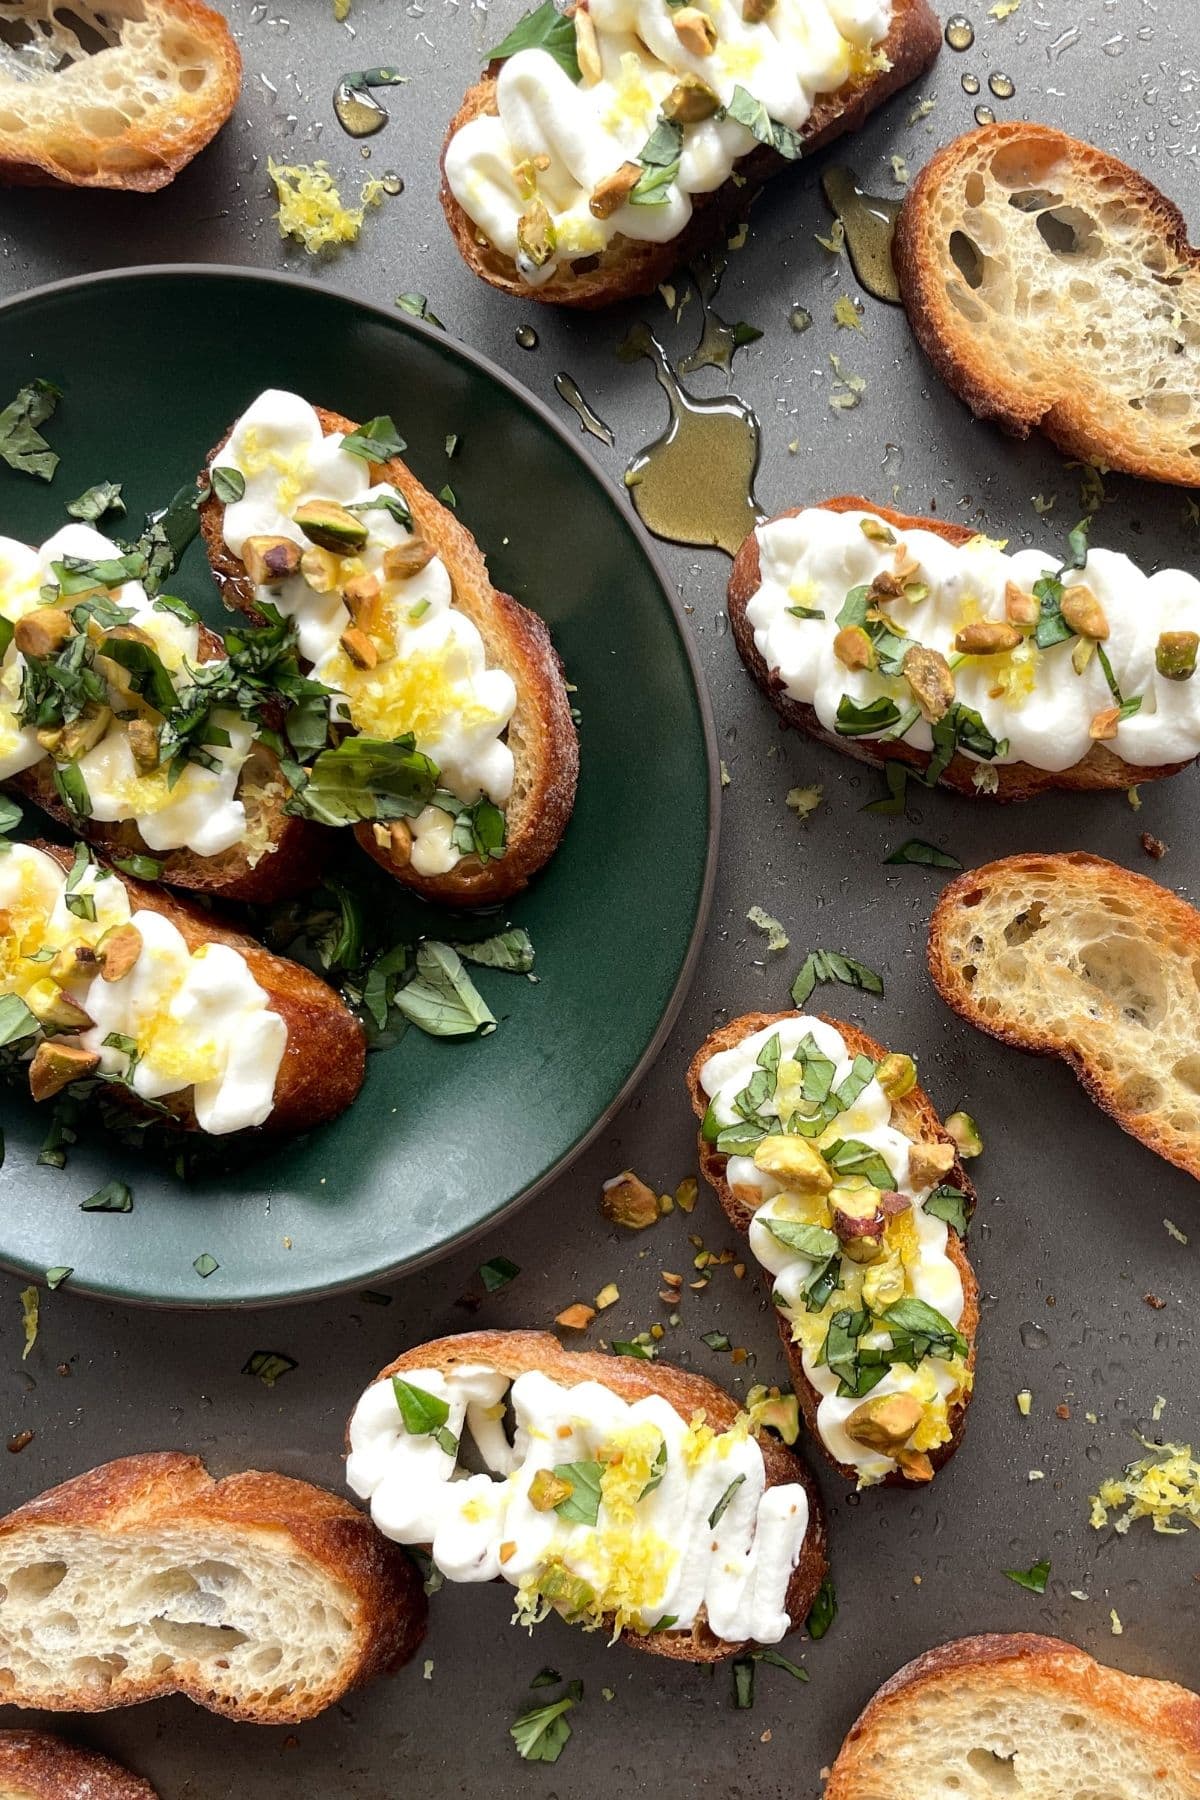 Crostini slices topped with whipped ricotta garnished with pecans, lemon zest. 